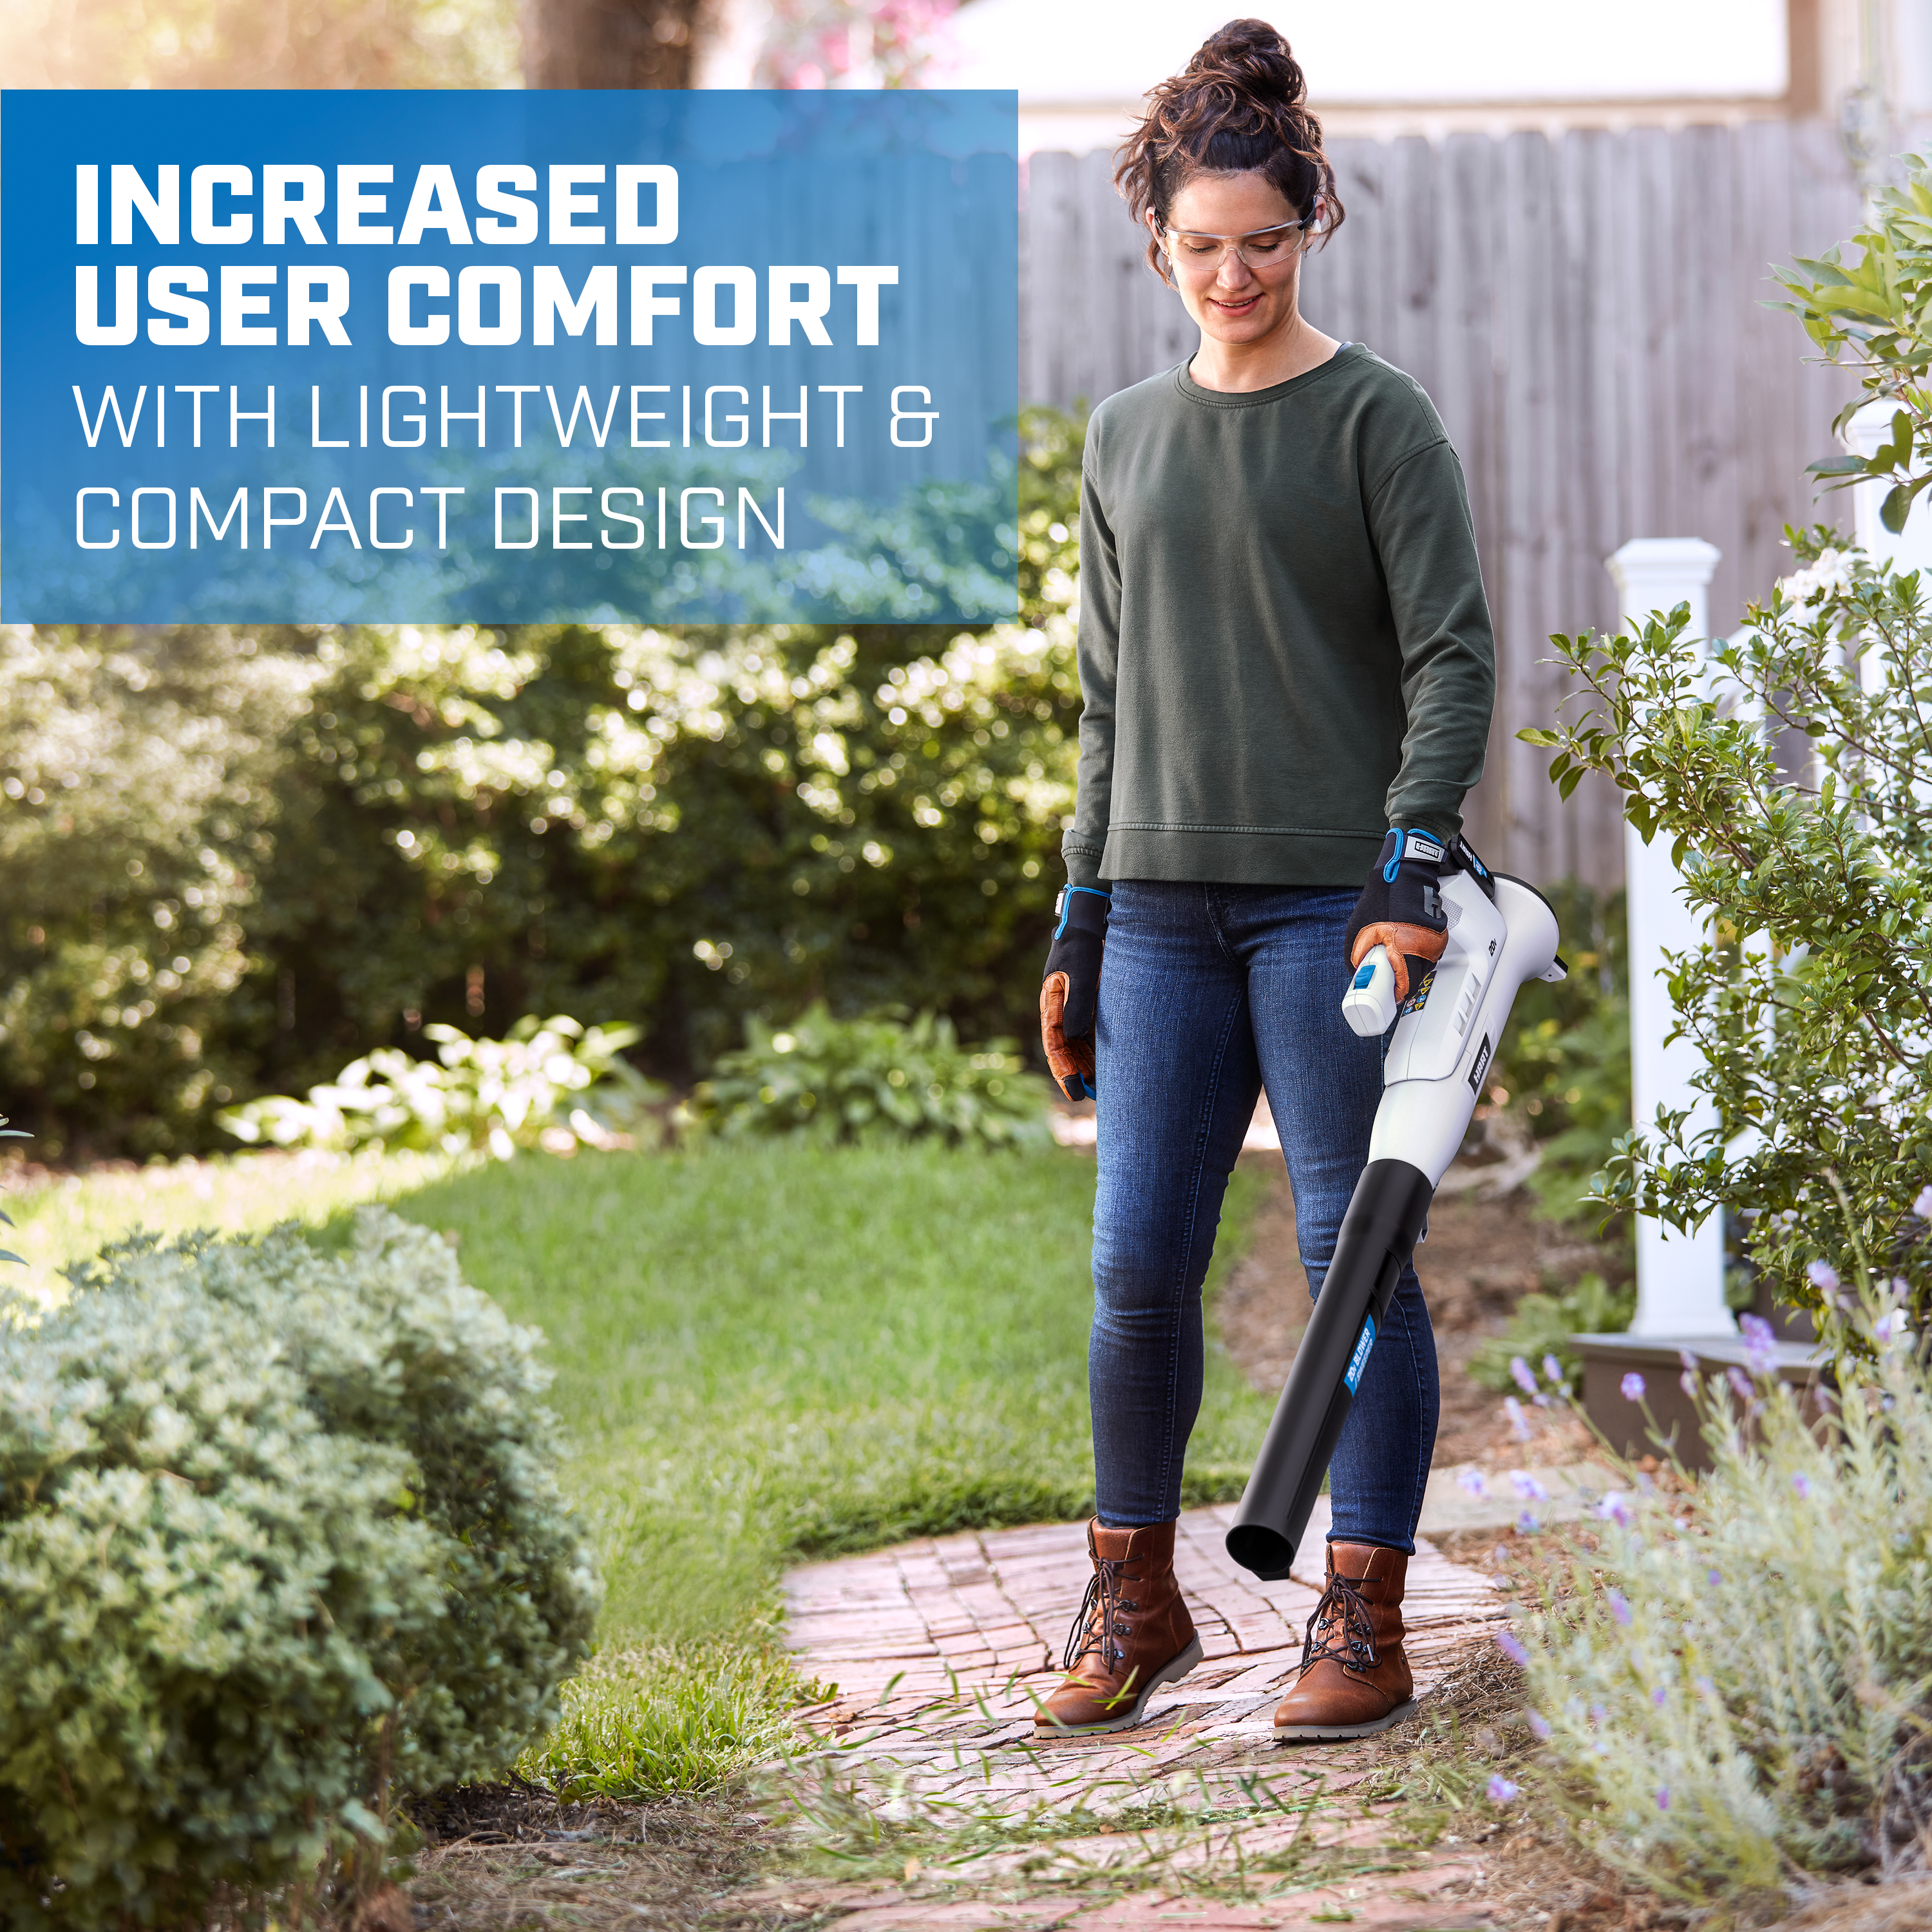 Increased User Comfort with Lightweight & Compact Design